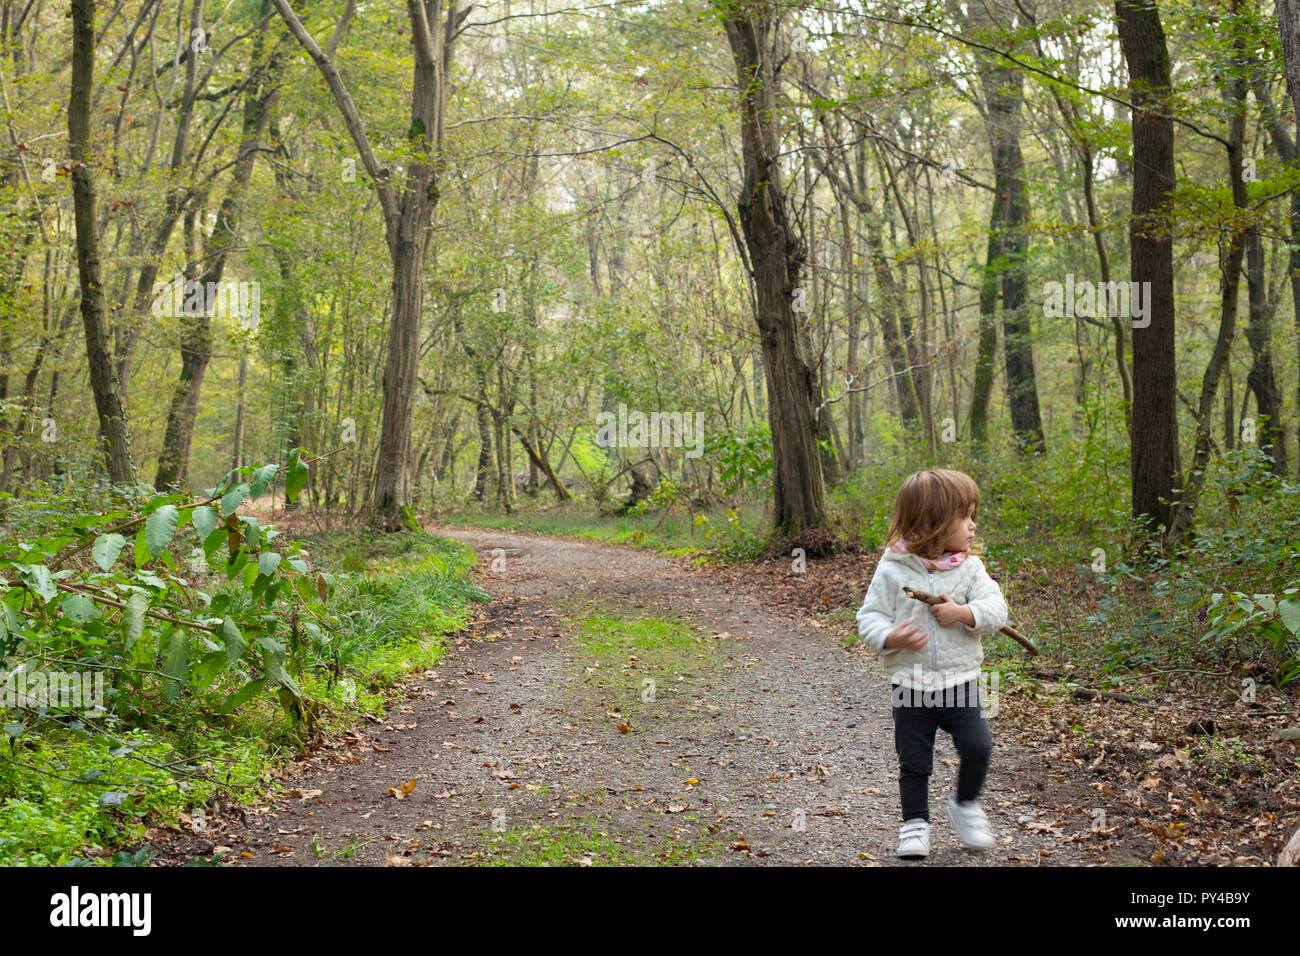 Blonde toddler girl walking alone in autumn woodland scenery. Parco del Ticino, La Fagiana, Magenta, Lombardy, Italy. Stock Photo